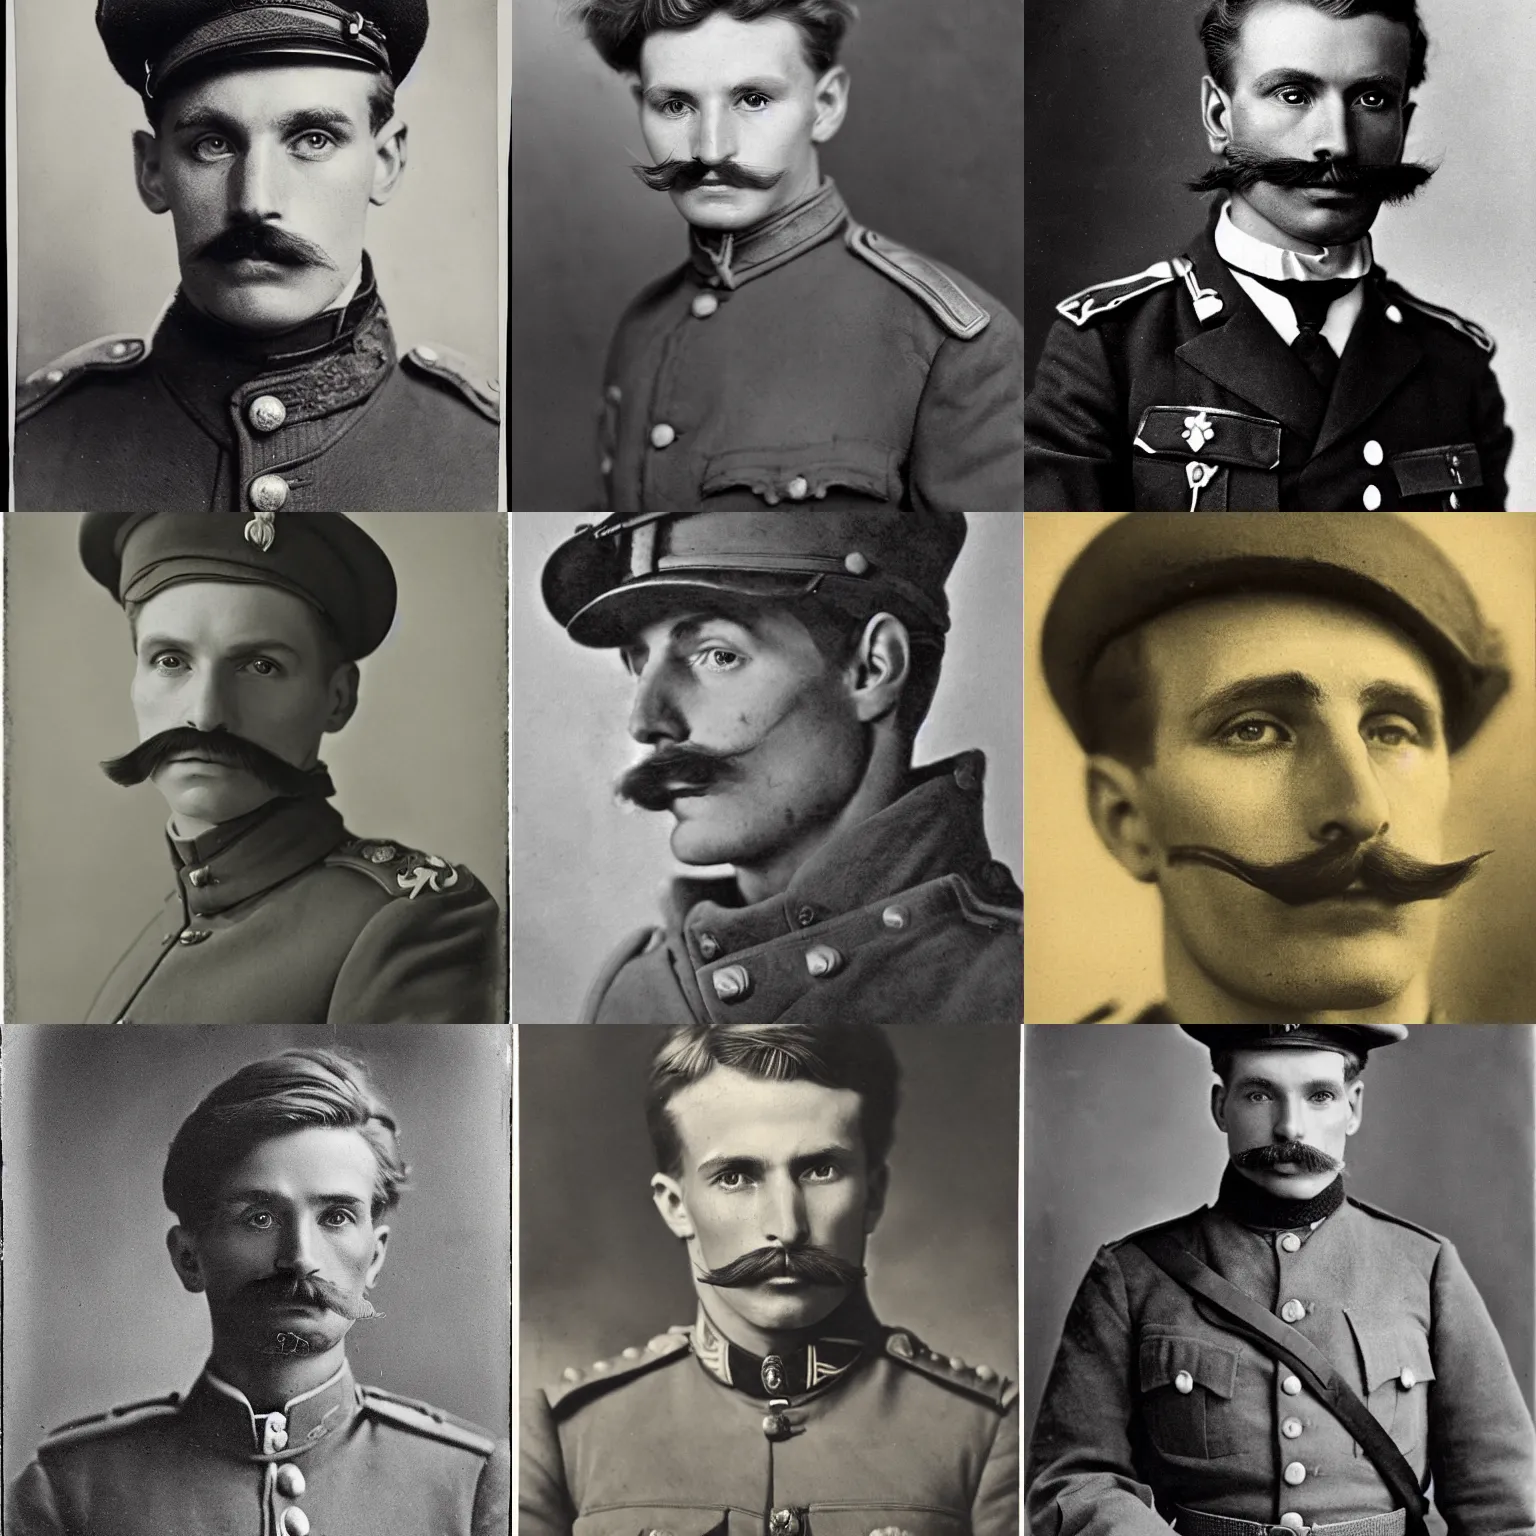 Prompt: late 1 9 th century, austro - hungarian!!! soldier ( handsome, 2 7 years old, redhead michał zebrowski with a small mustache ). old, detailed, hyperrealistic, 1 9 th century portait by yousuf karsh, mednyanszky laszlo and munkacsi